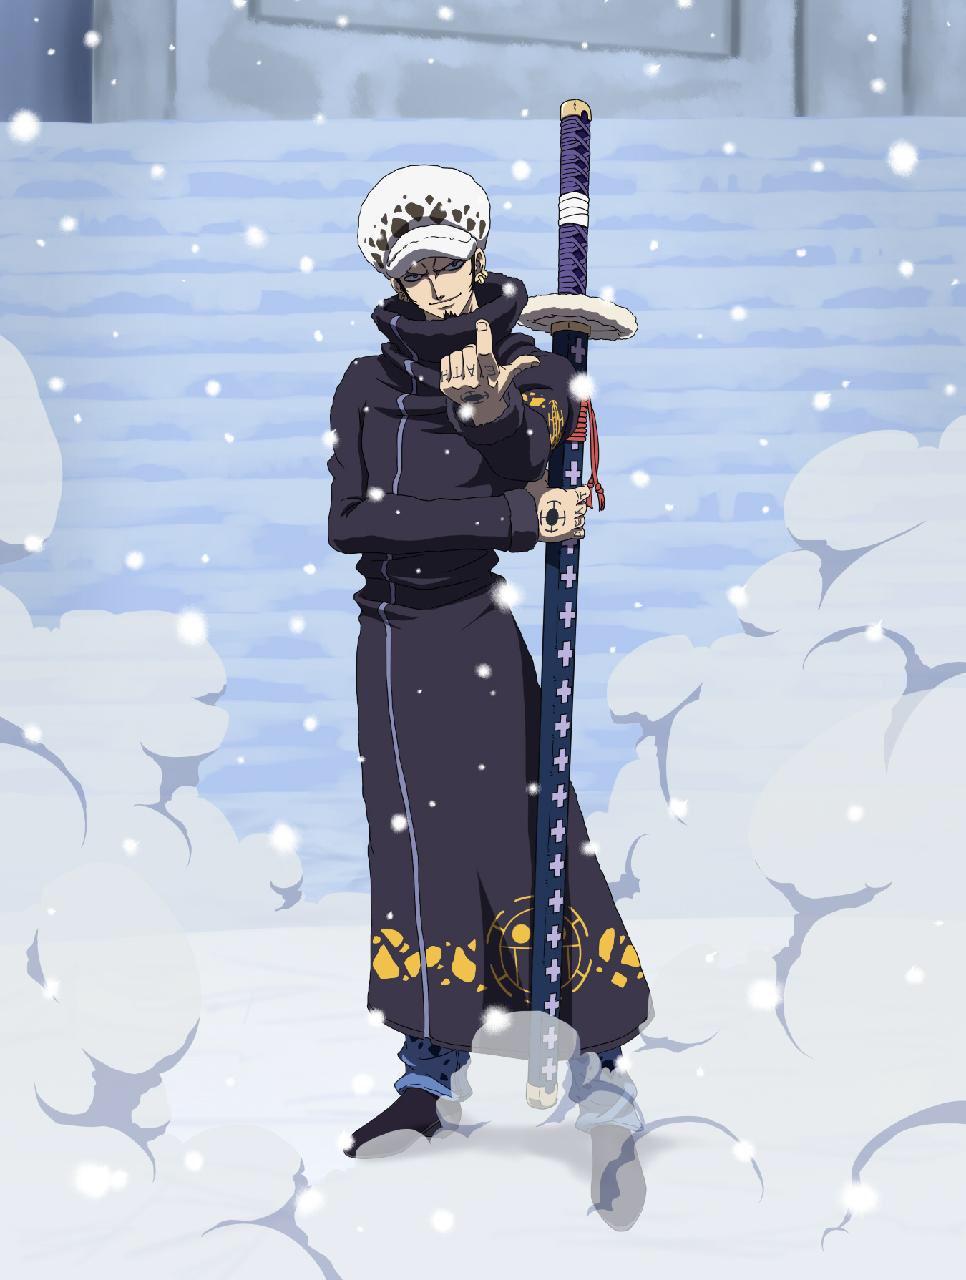 35 Trafalgar Law Wallpapers for iPhone and Android by Tim Chan